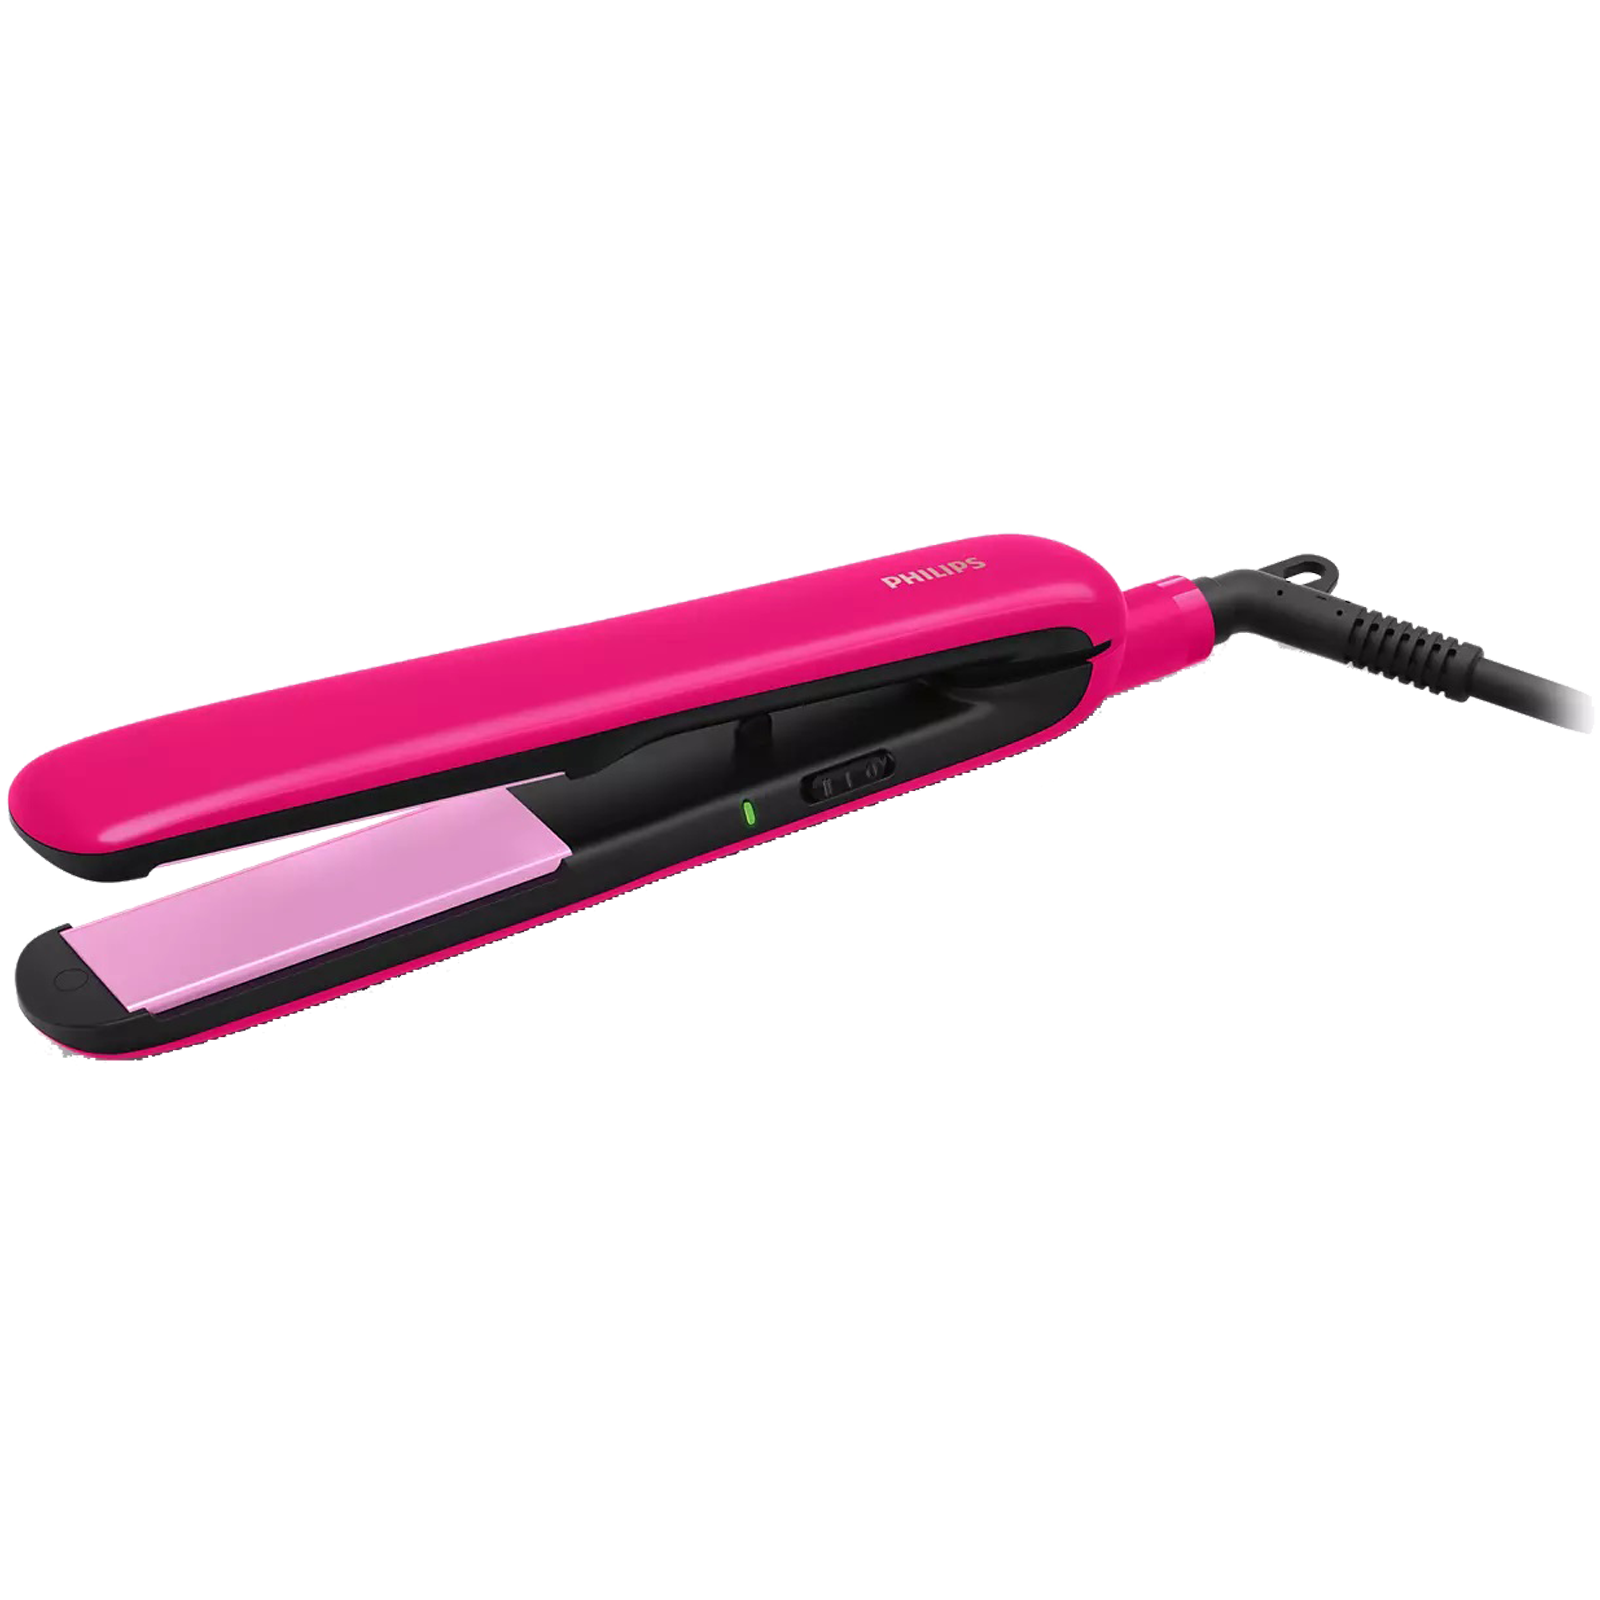 Philips 2000 Series Corded Straightener (SilkProtect Technology, BHS393/00, Bright Pink)_1